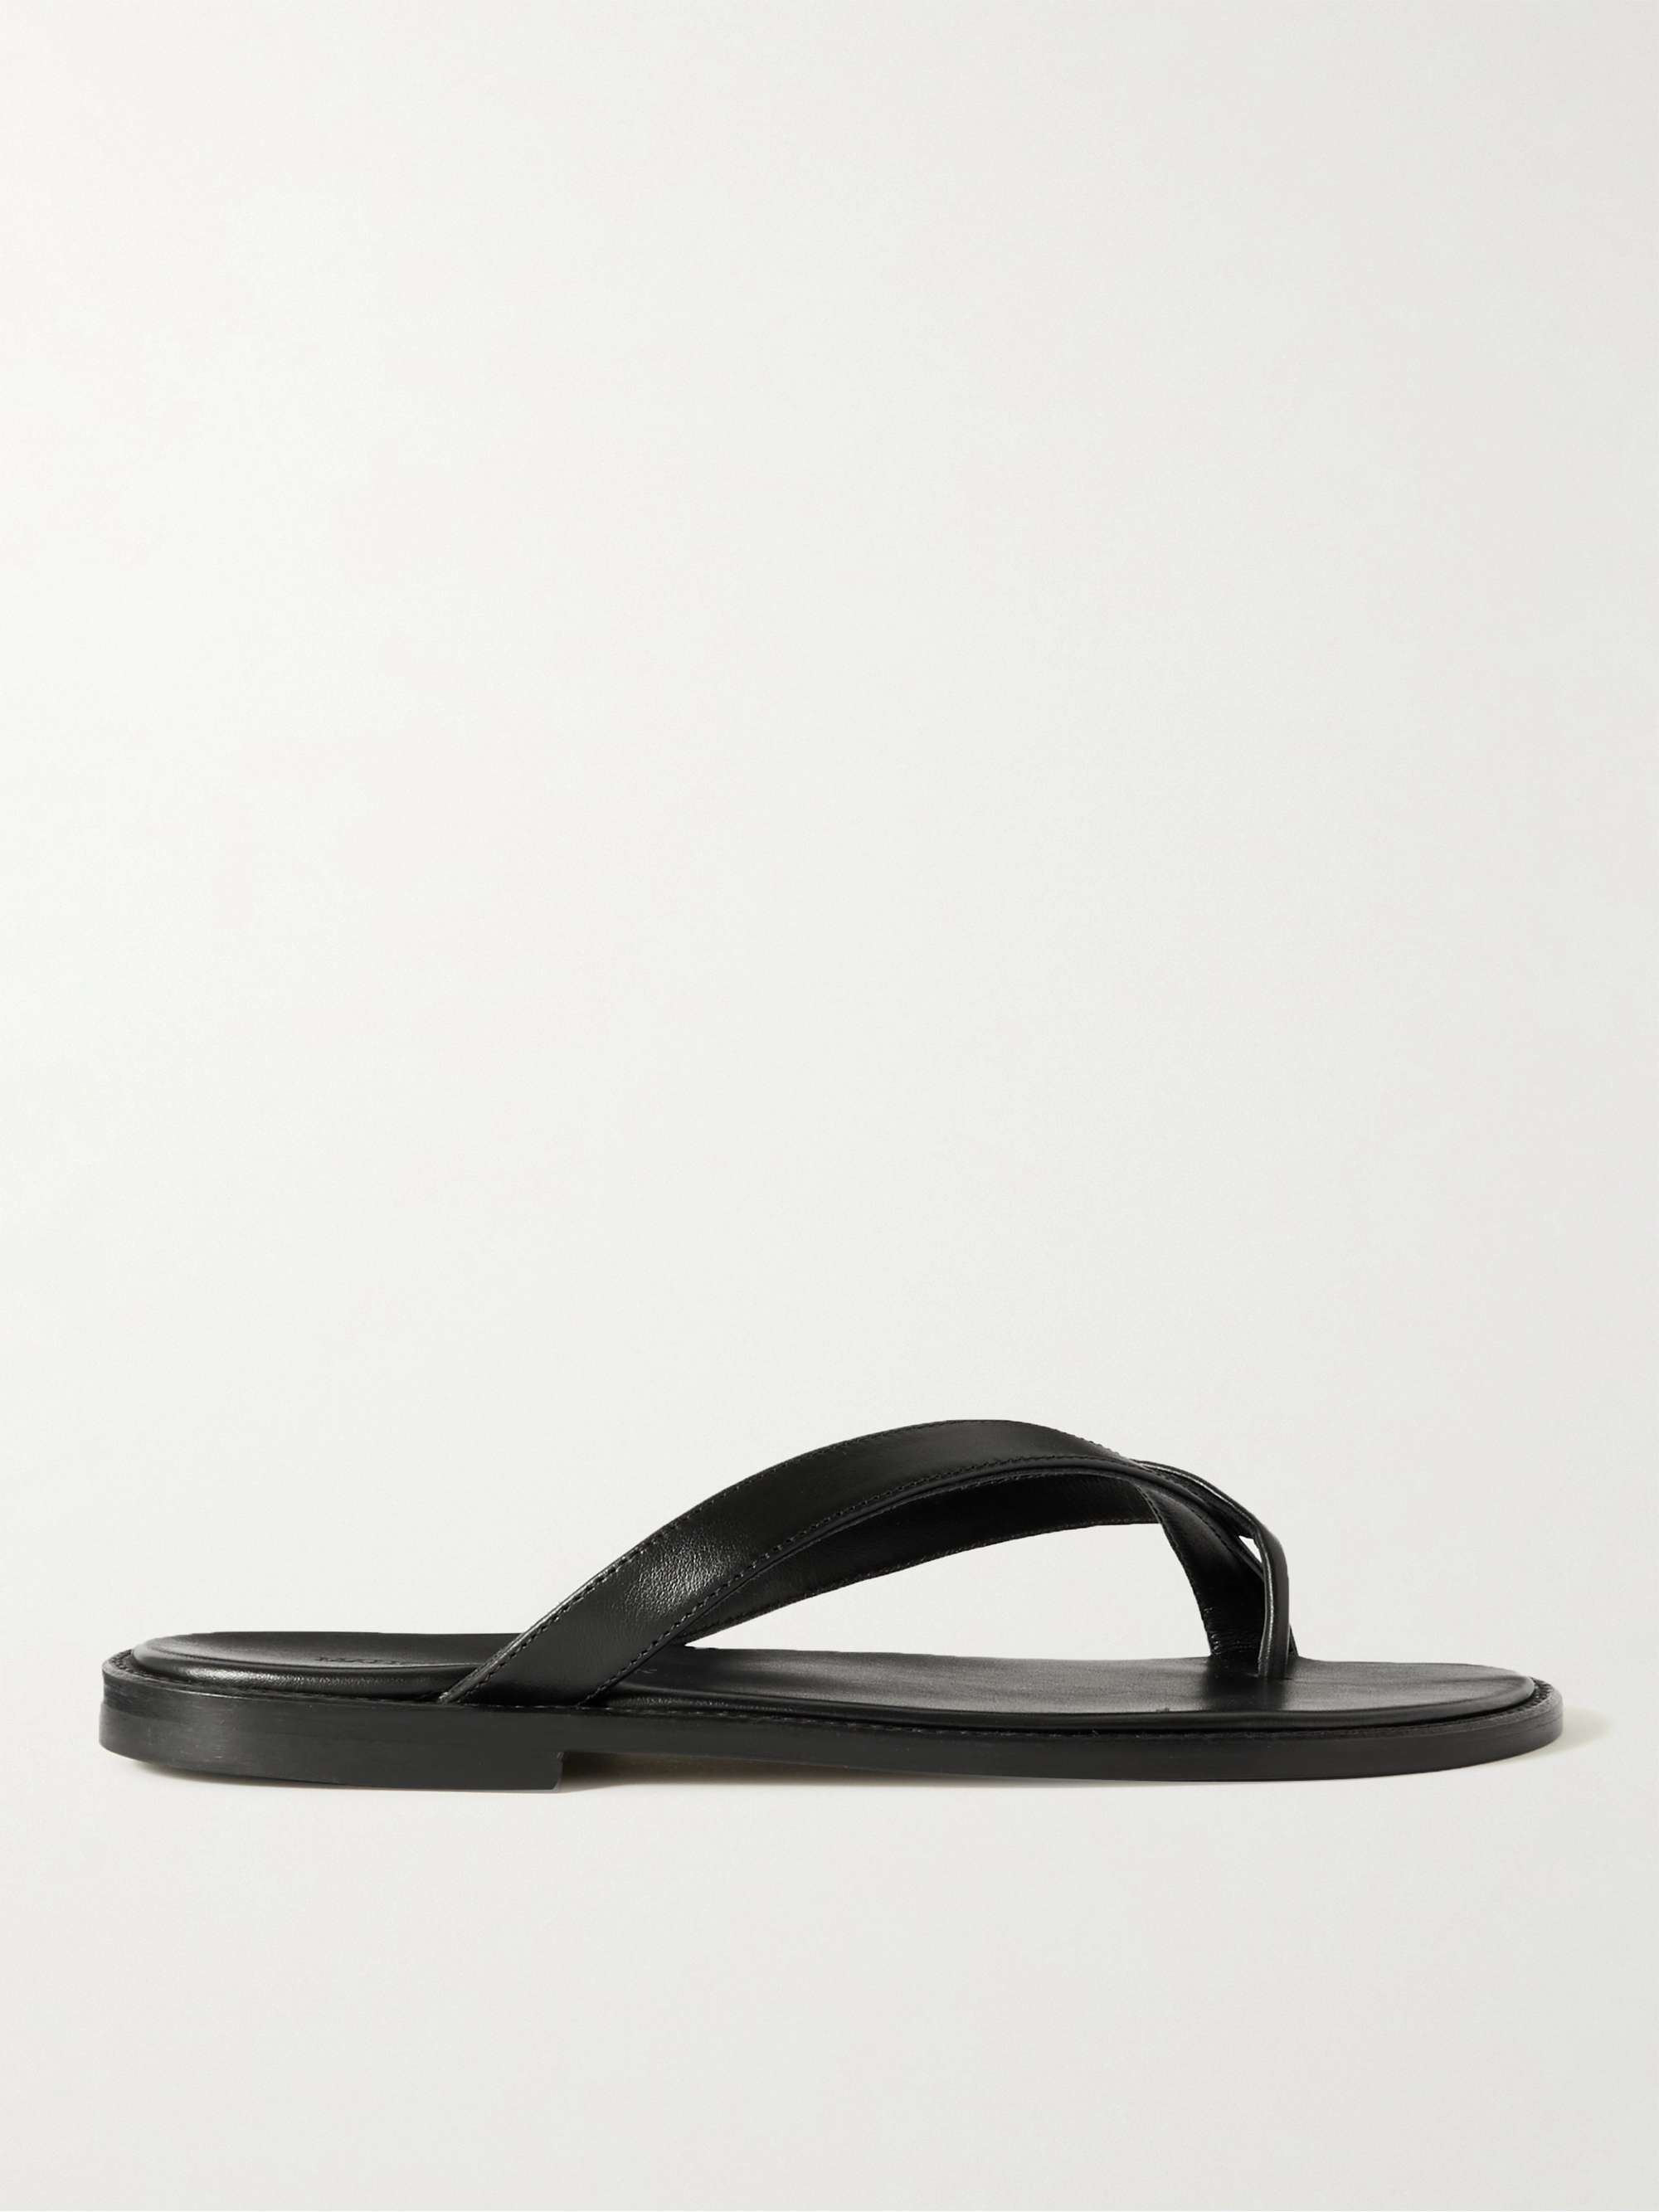 Siracusa Leather Flip Flops